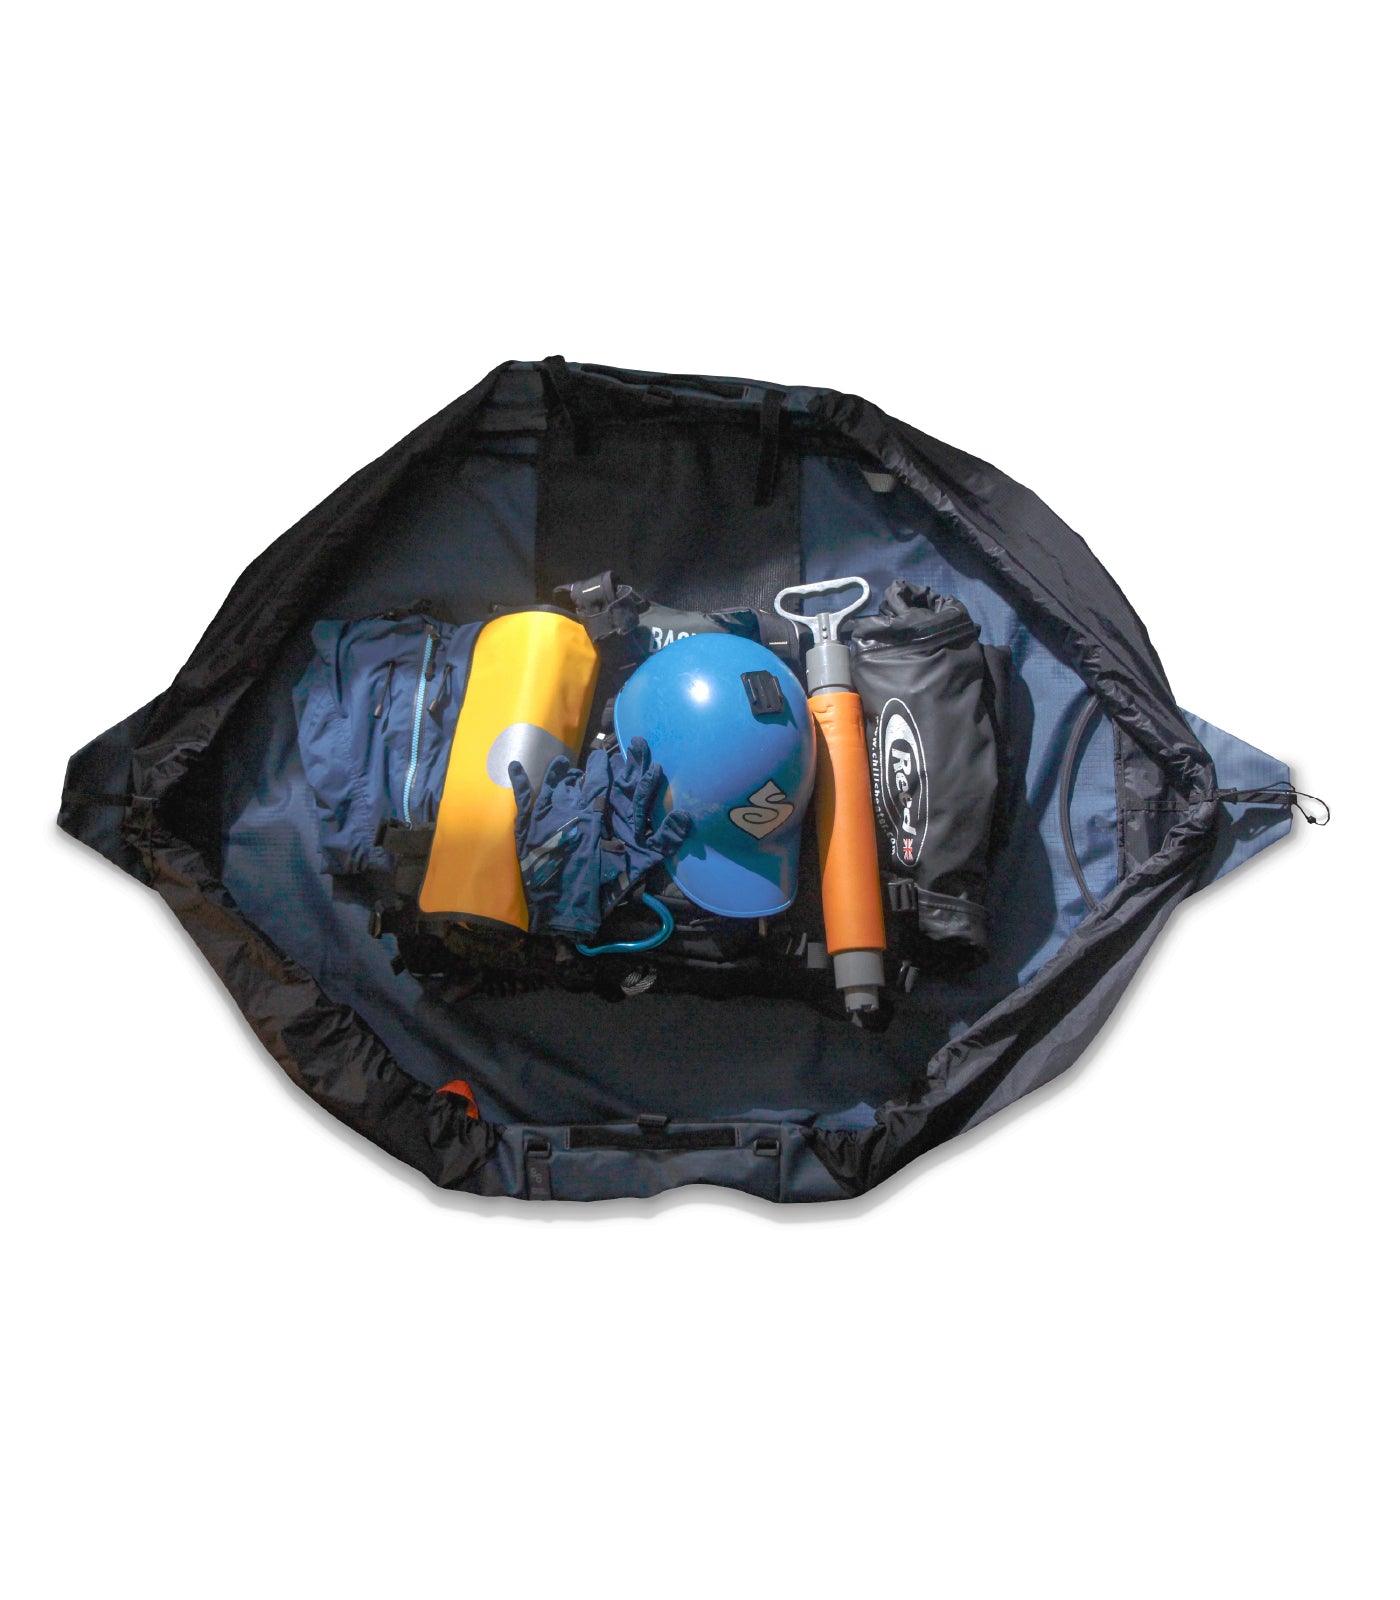 Water proof outdoor duffle bag. Discover a new way to quickly pack and move your dry and wet gears. Large seamless waterproof tarp and quick cinch cords are for outdoor gears of all sizes and shapes. Whether you're planning a day out at the beach or setting forth on a multi-day expedition, we got you wrapped and ready to go.